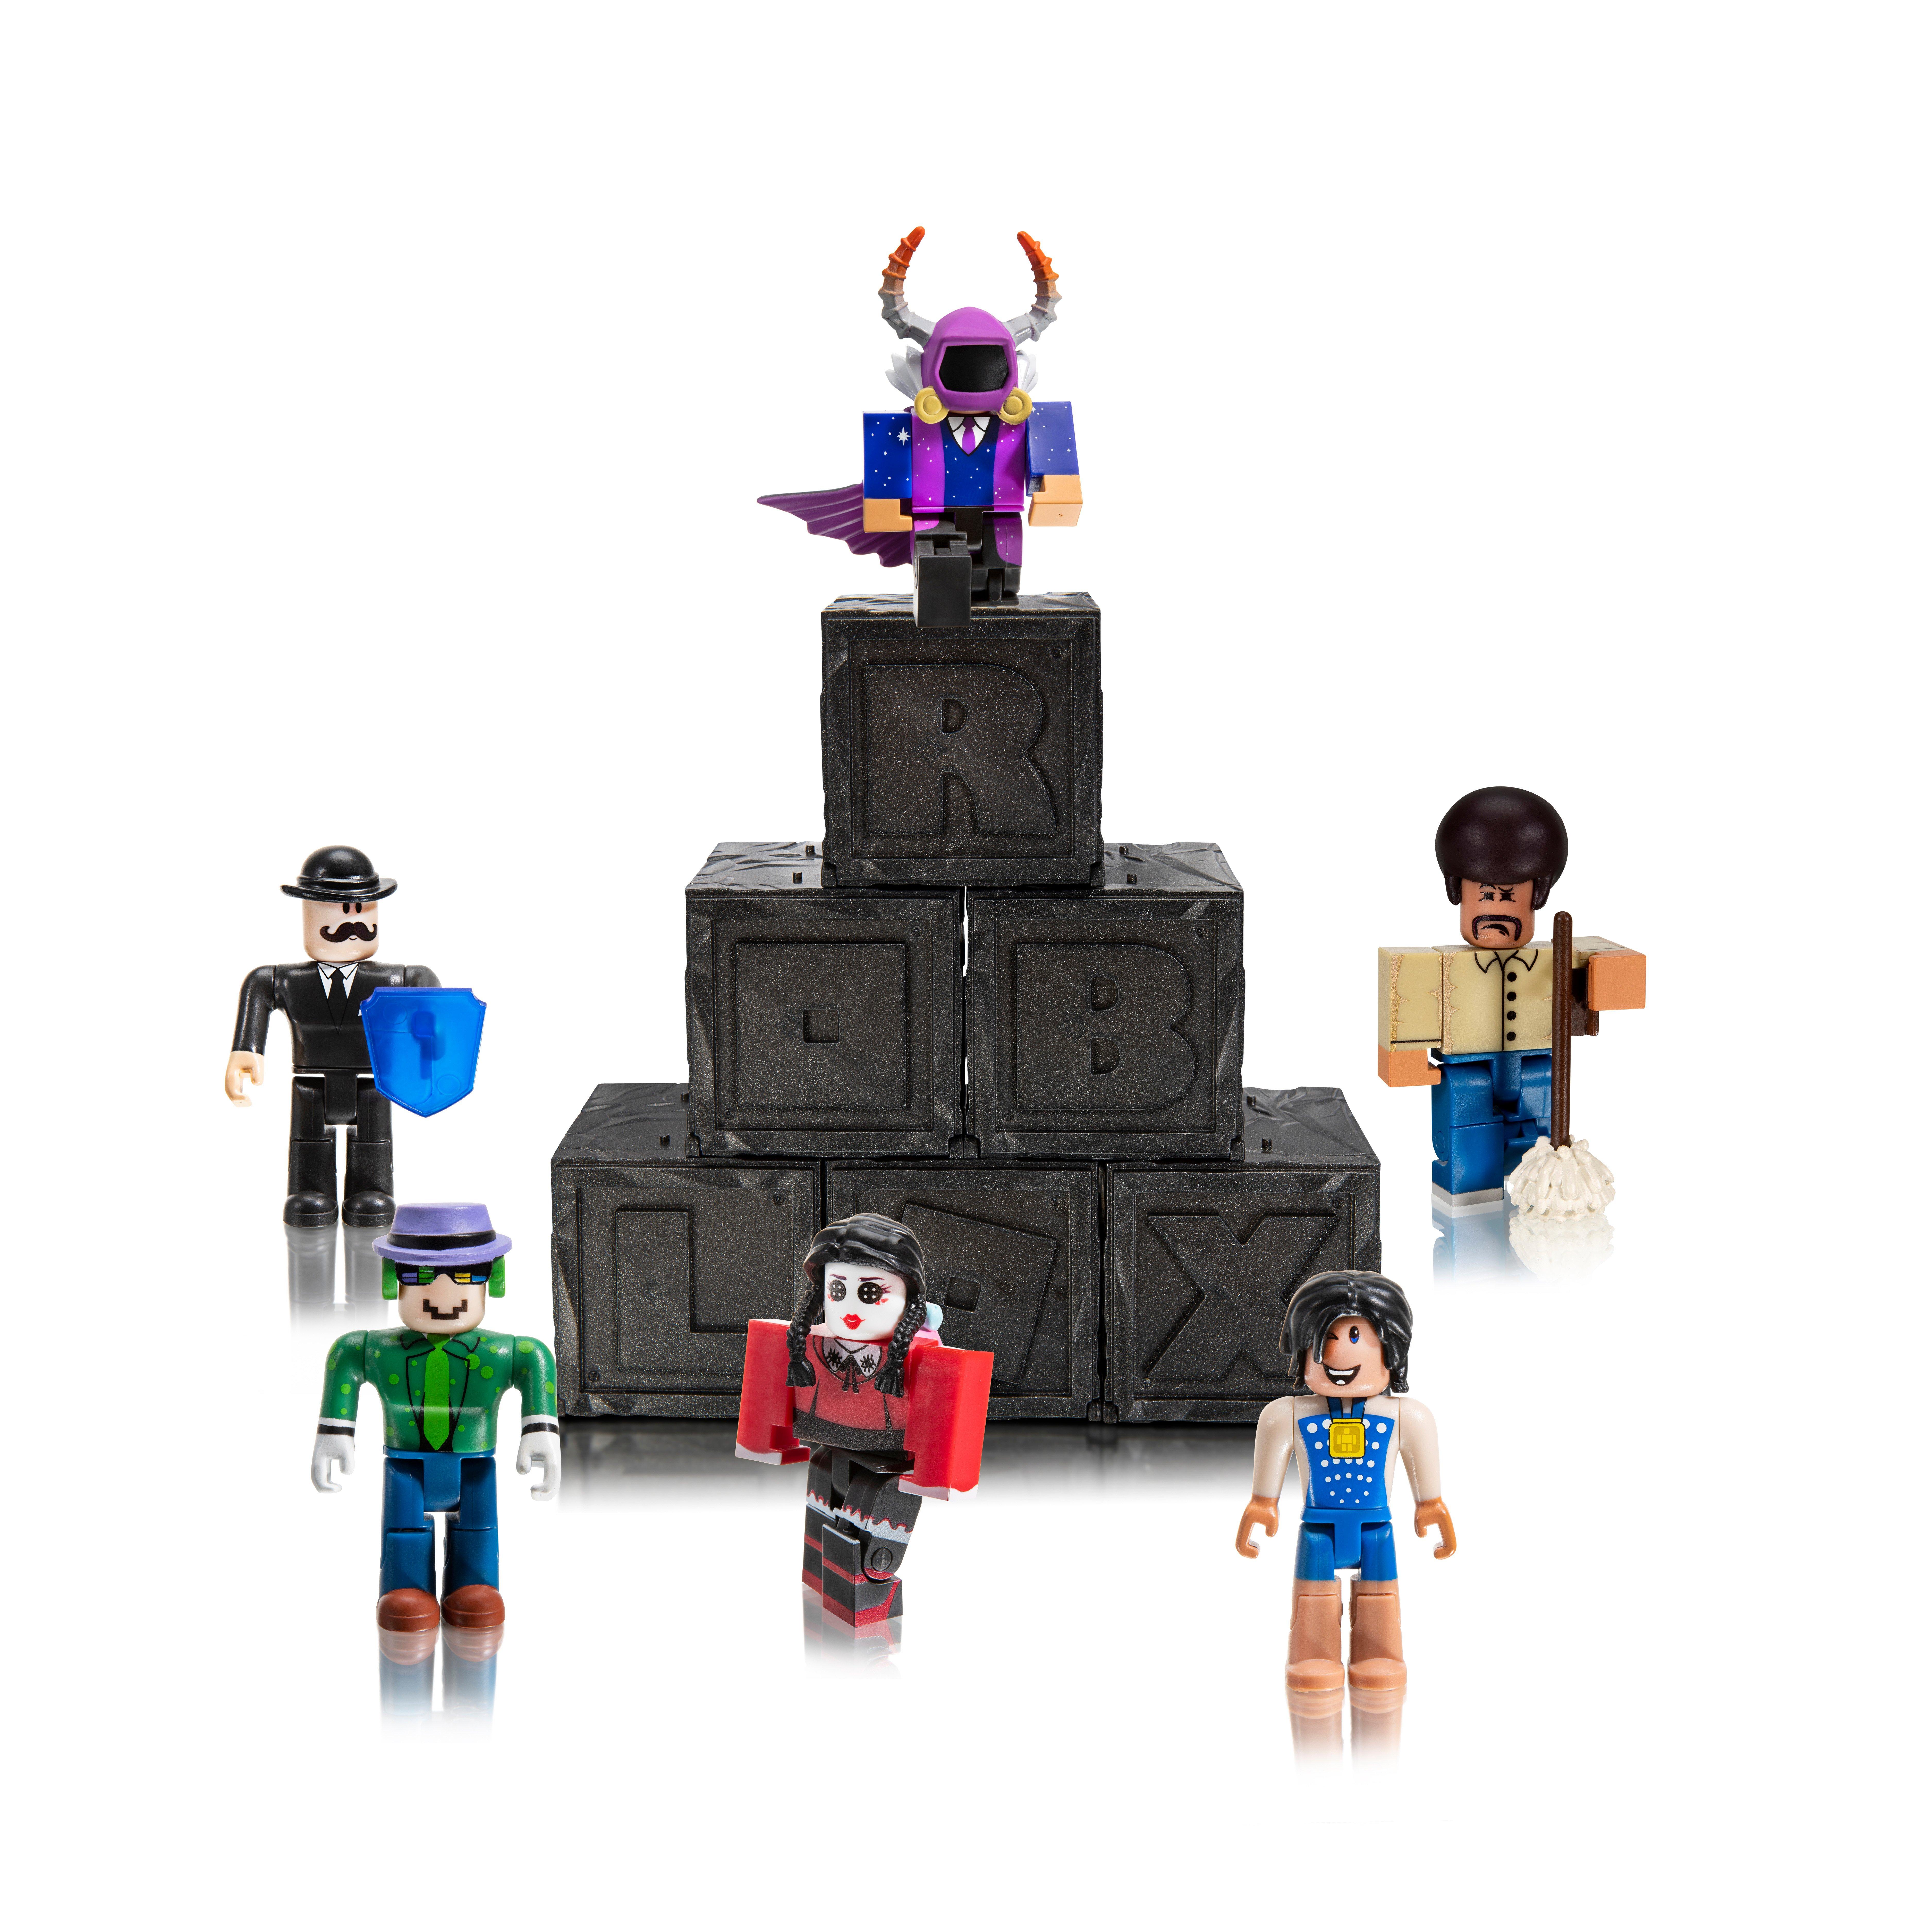 Roblox Action Collection Series 7 Mystery Figure Includes 1 Figure And Exclusive Virtual Item Gamestop - roblox toys series 4 checklist